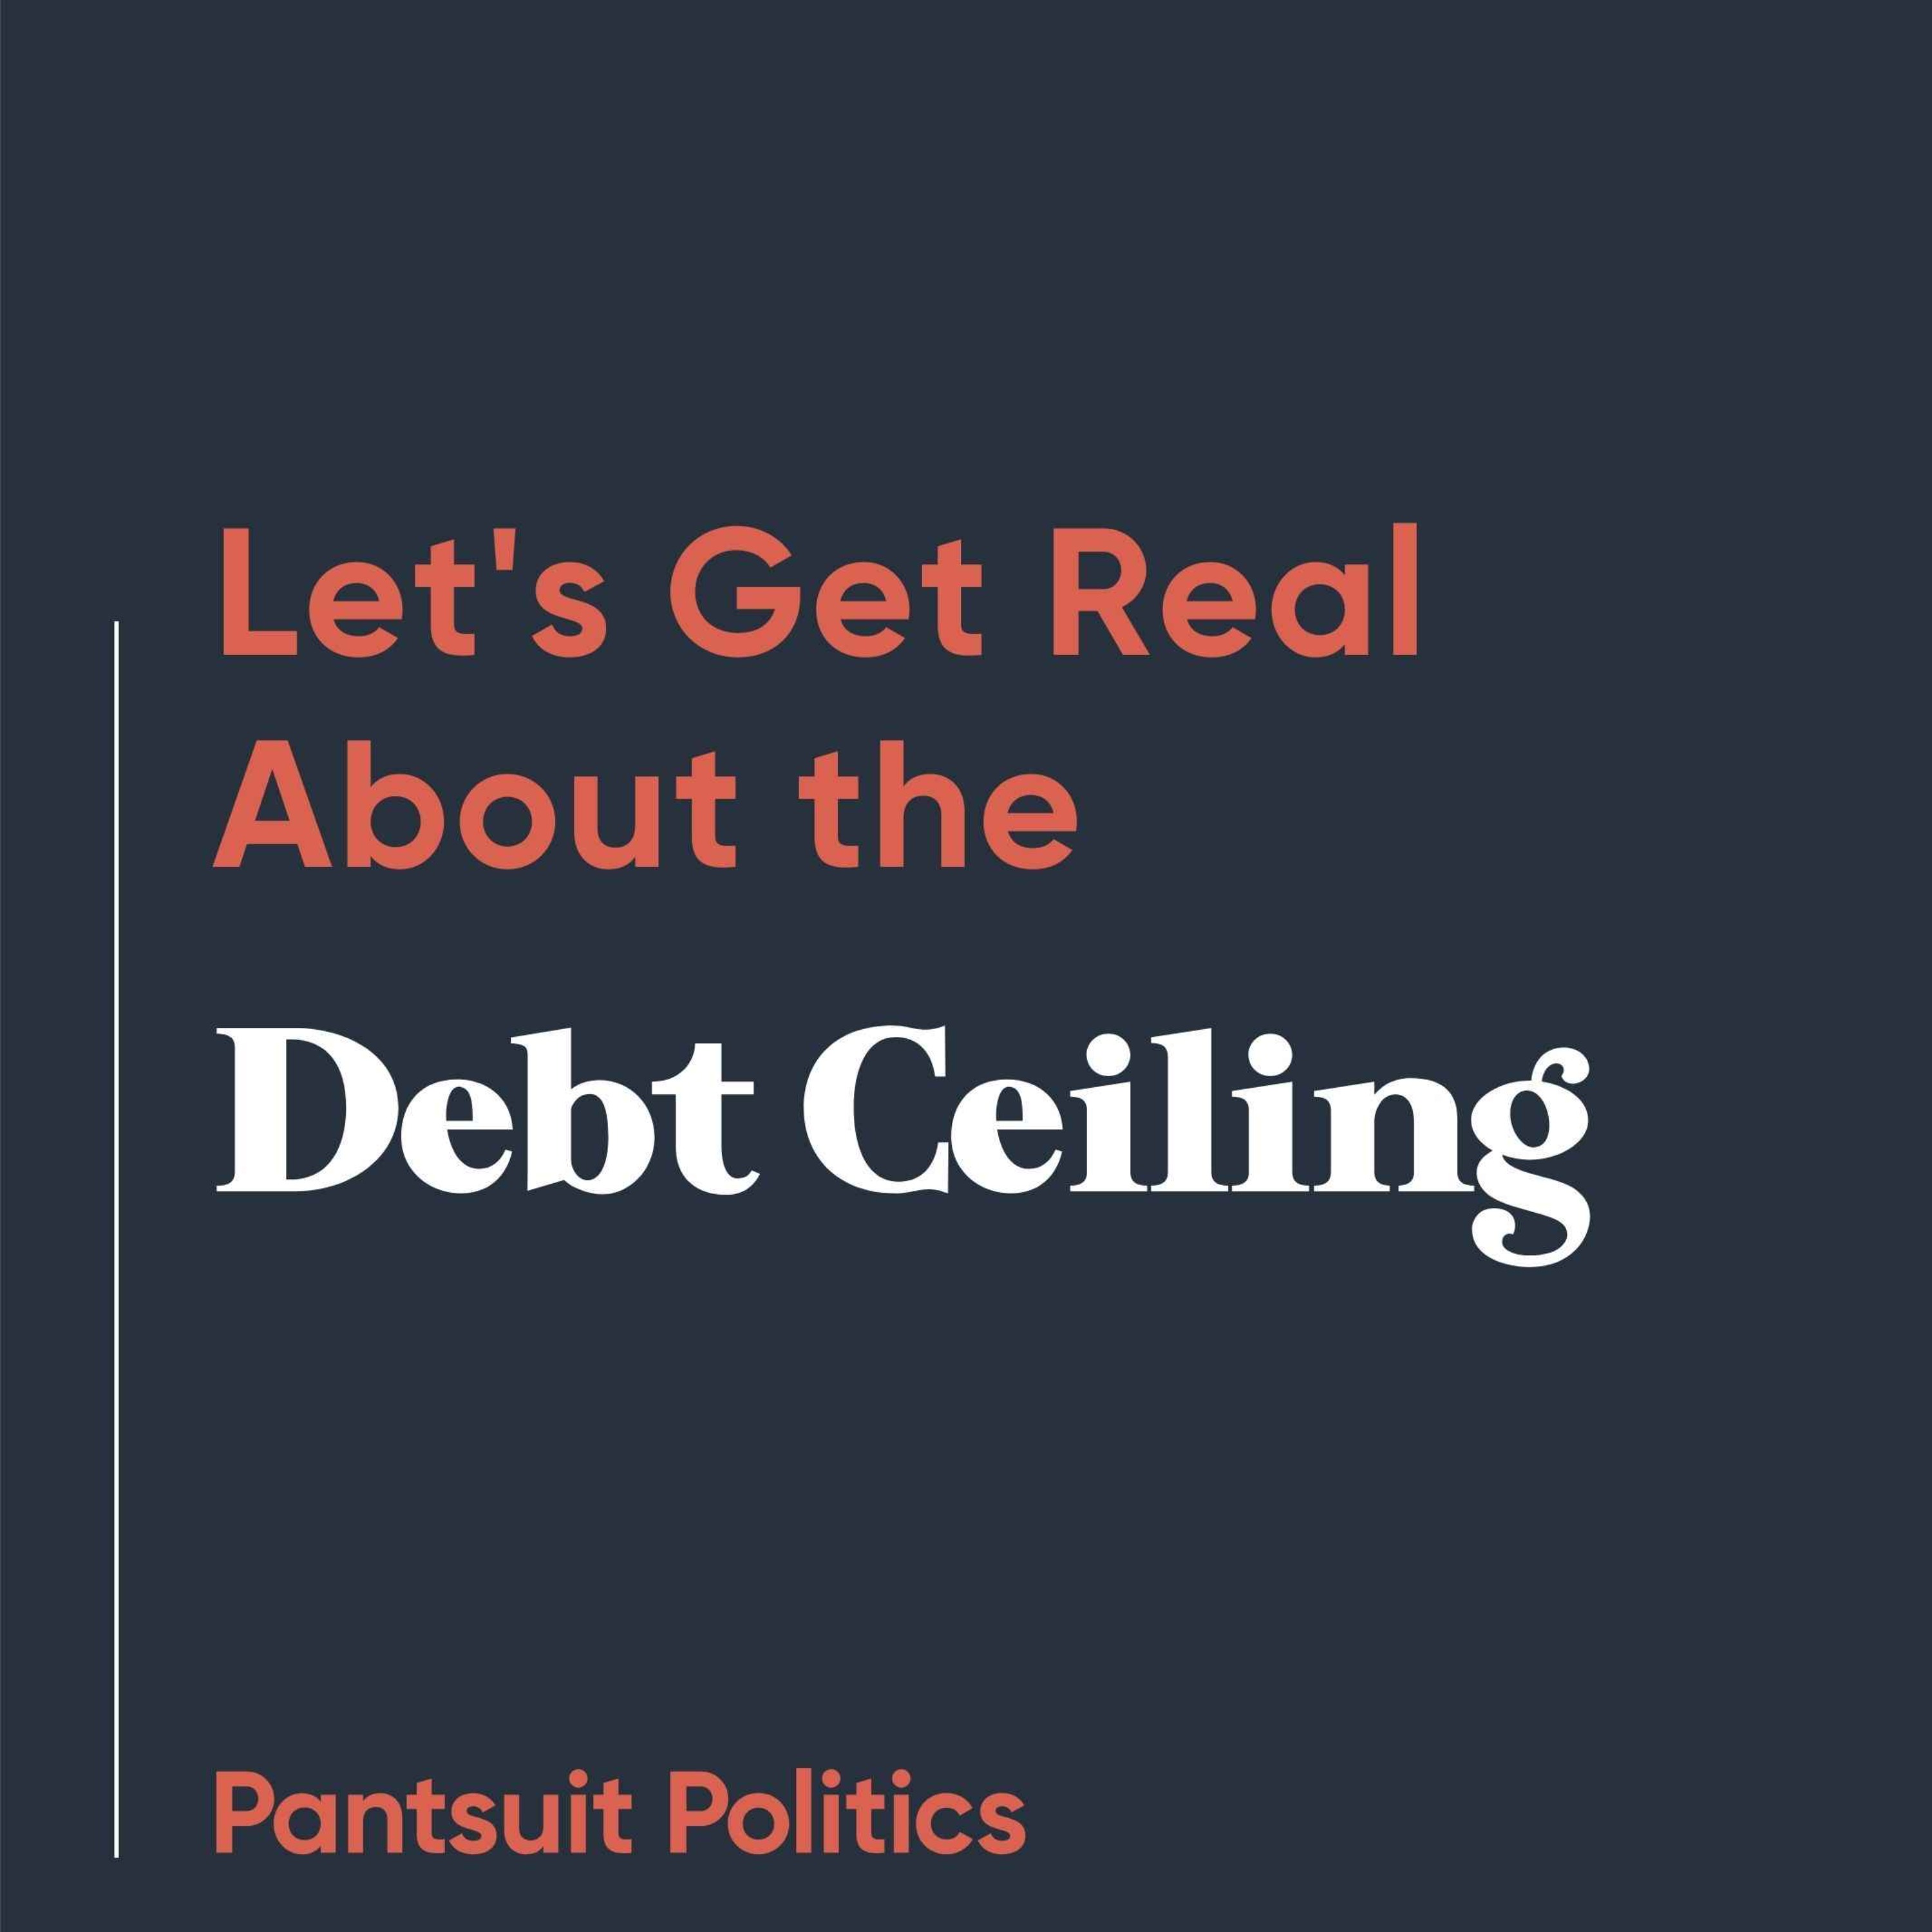 Let's Get Real About the Debt Ceiling